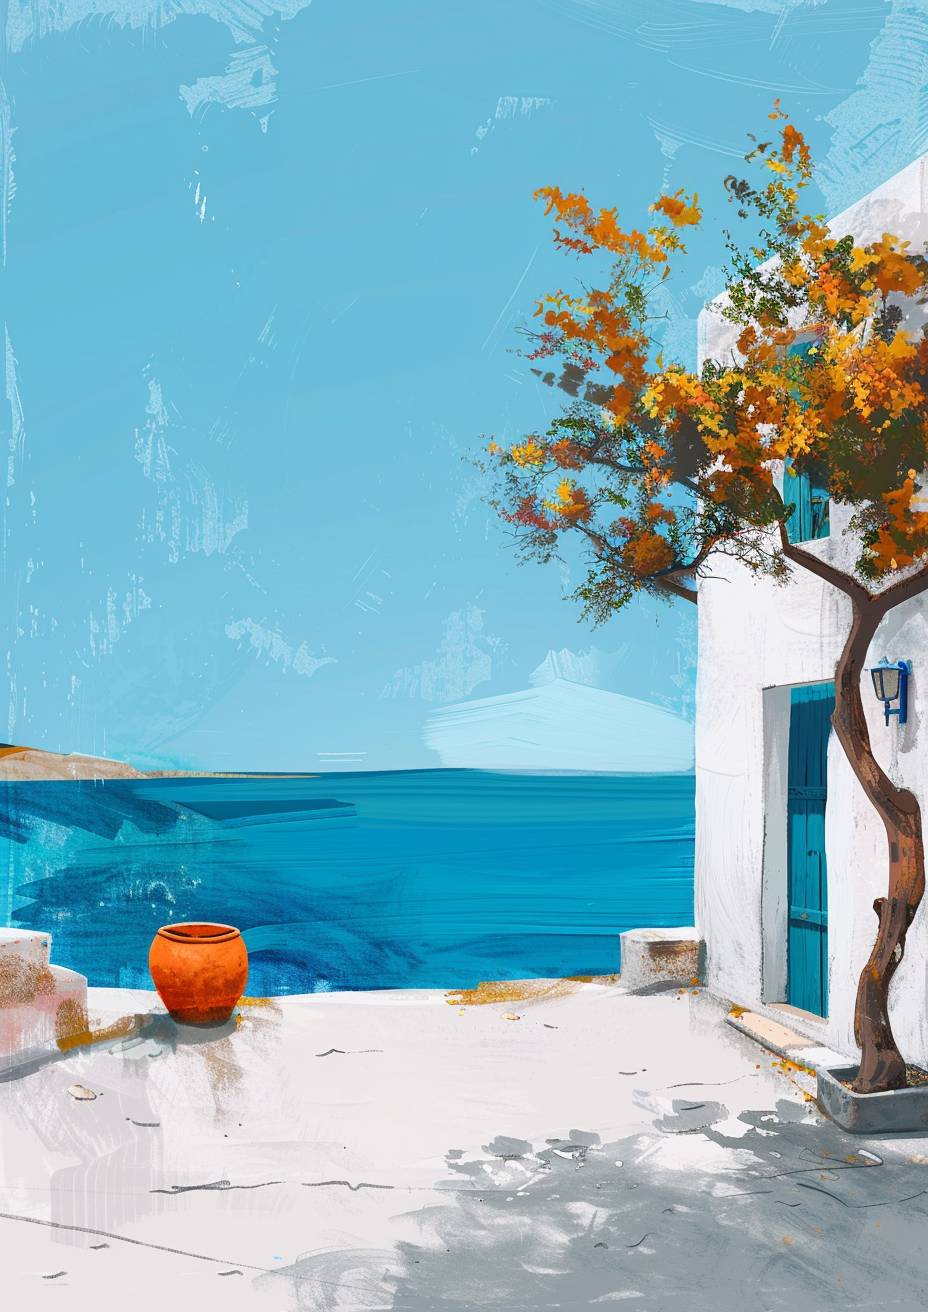 necard Aegean summer Greek artistic painting bohemian modern minimal plain naive style with lots of empty space